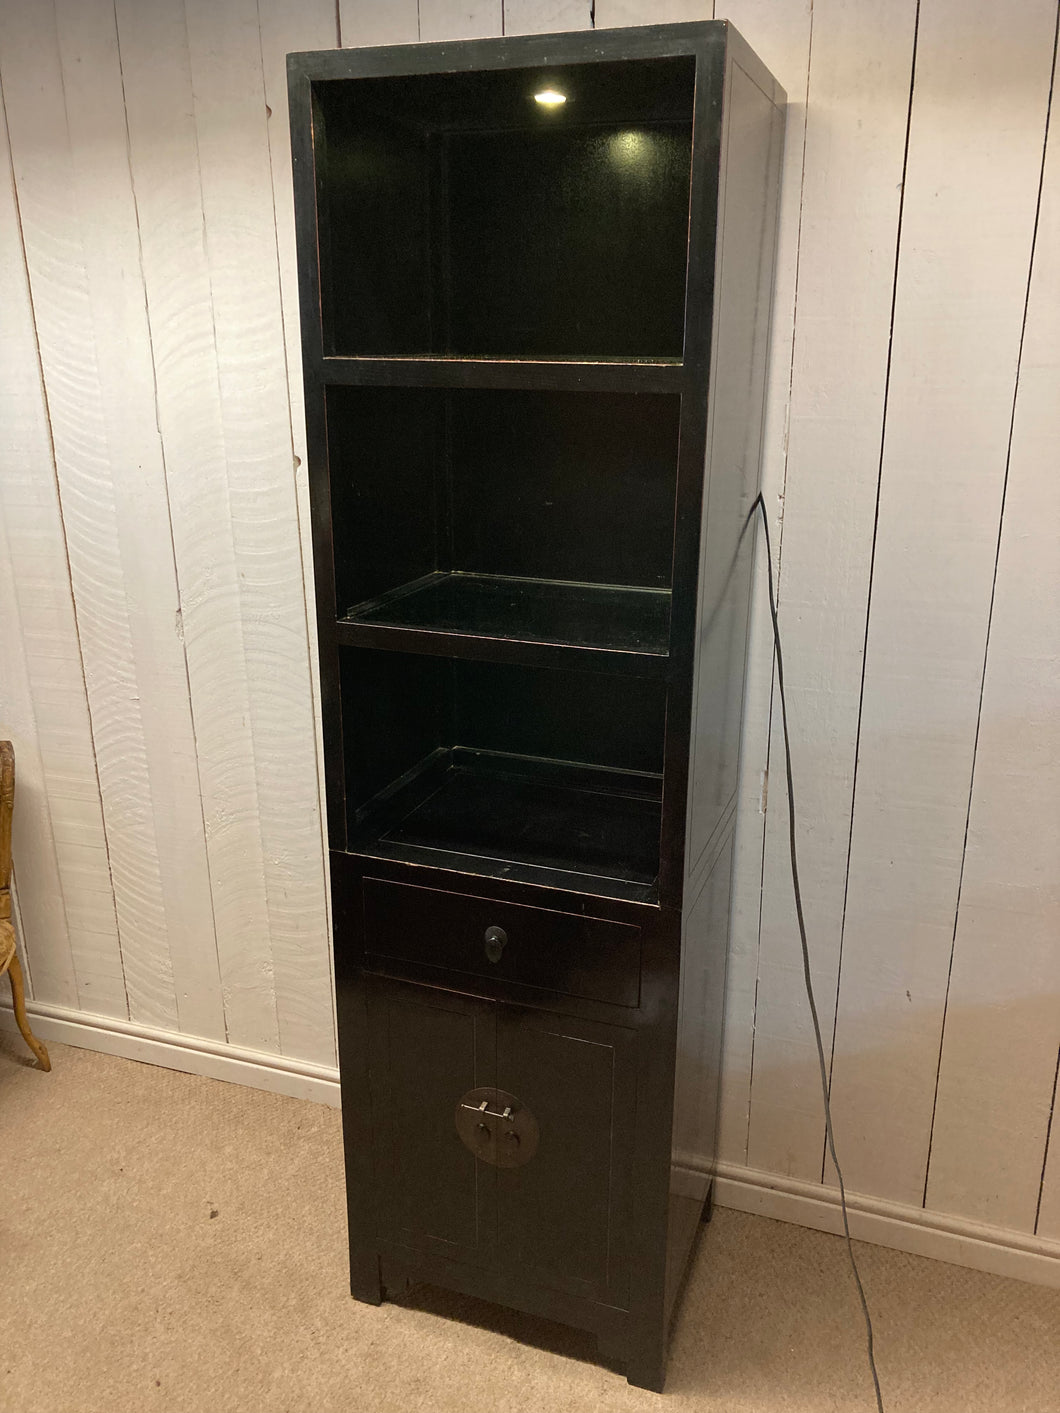 Chinese Chinoiserie Style Glass Shelving Unit With A Drawer Cupboard And Light